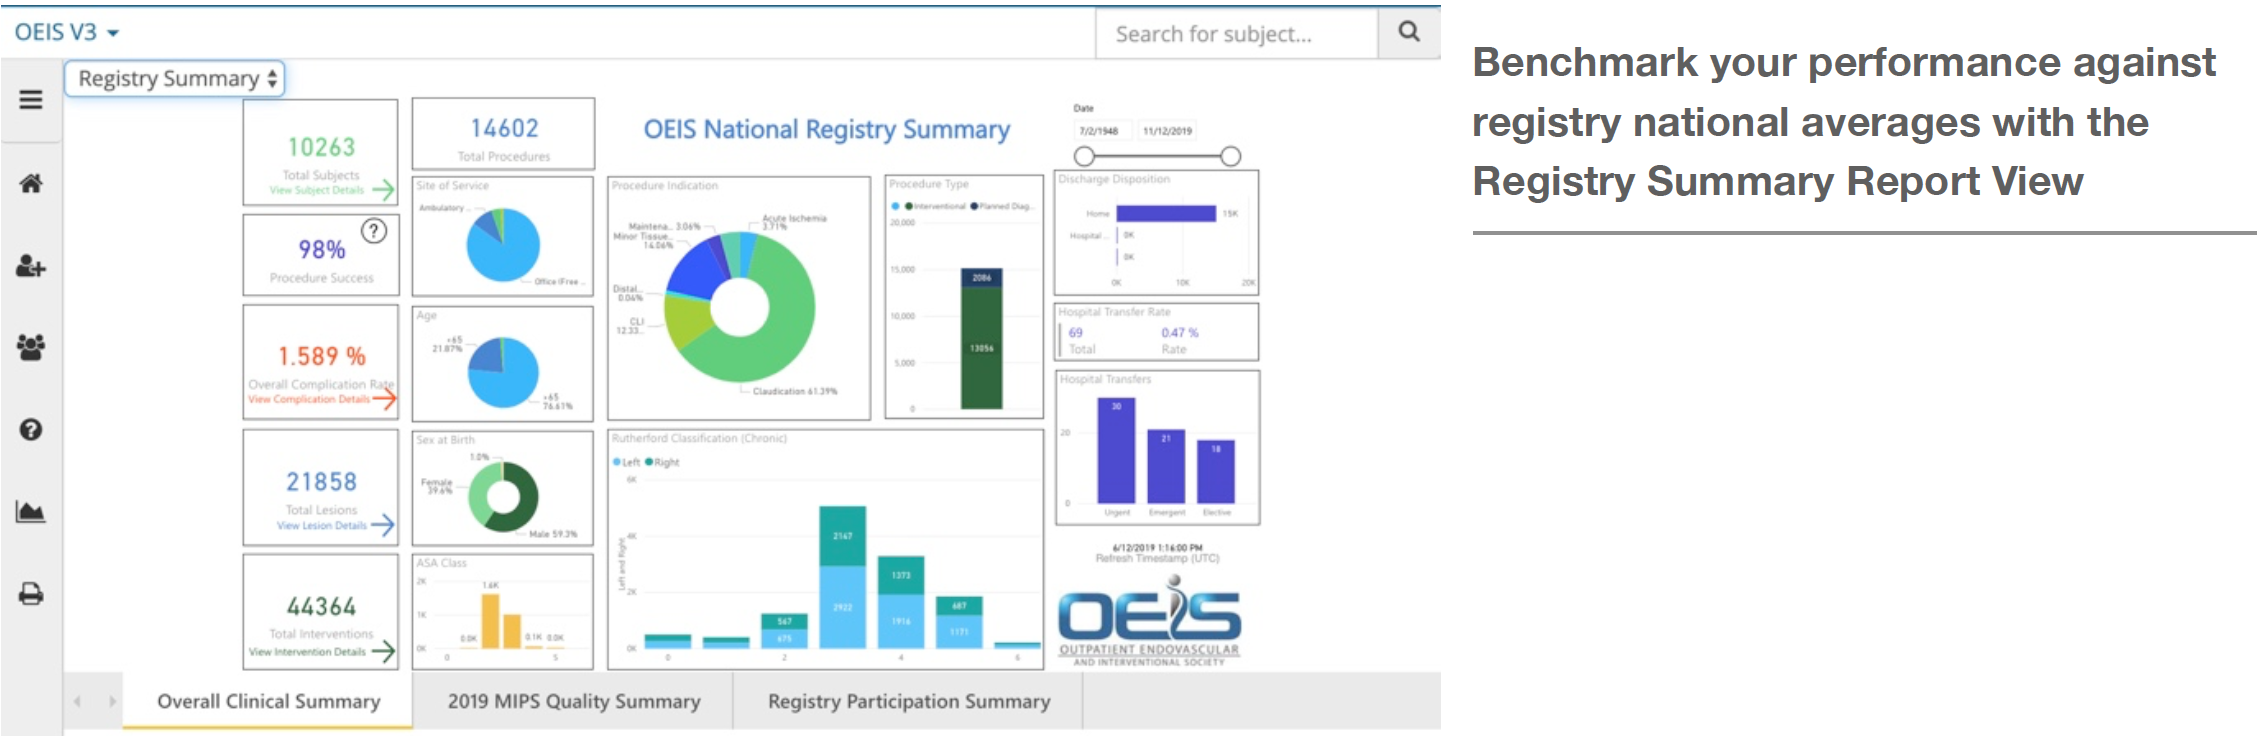 Registry Summary Report for the OEIS National Registry.